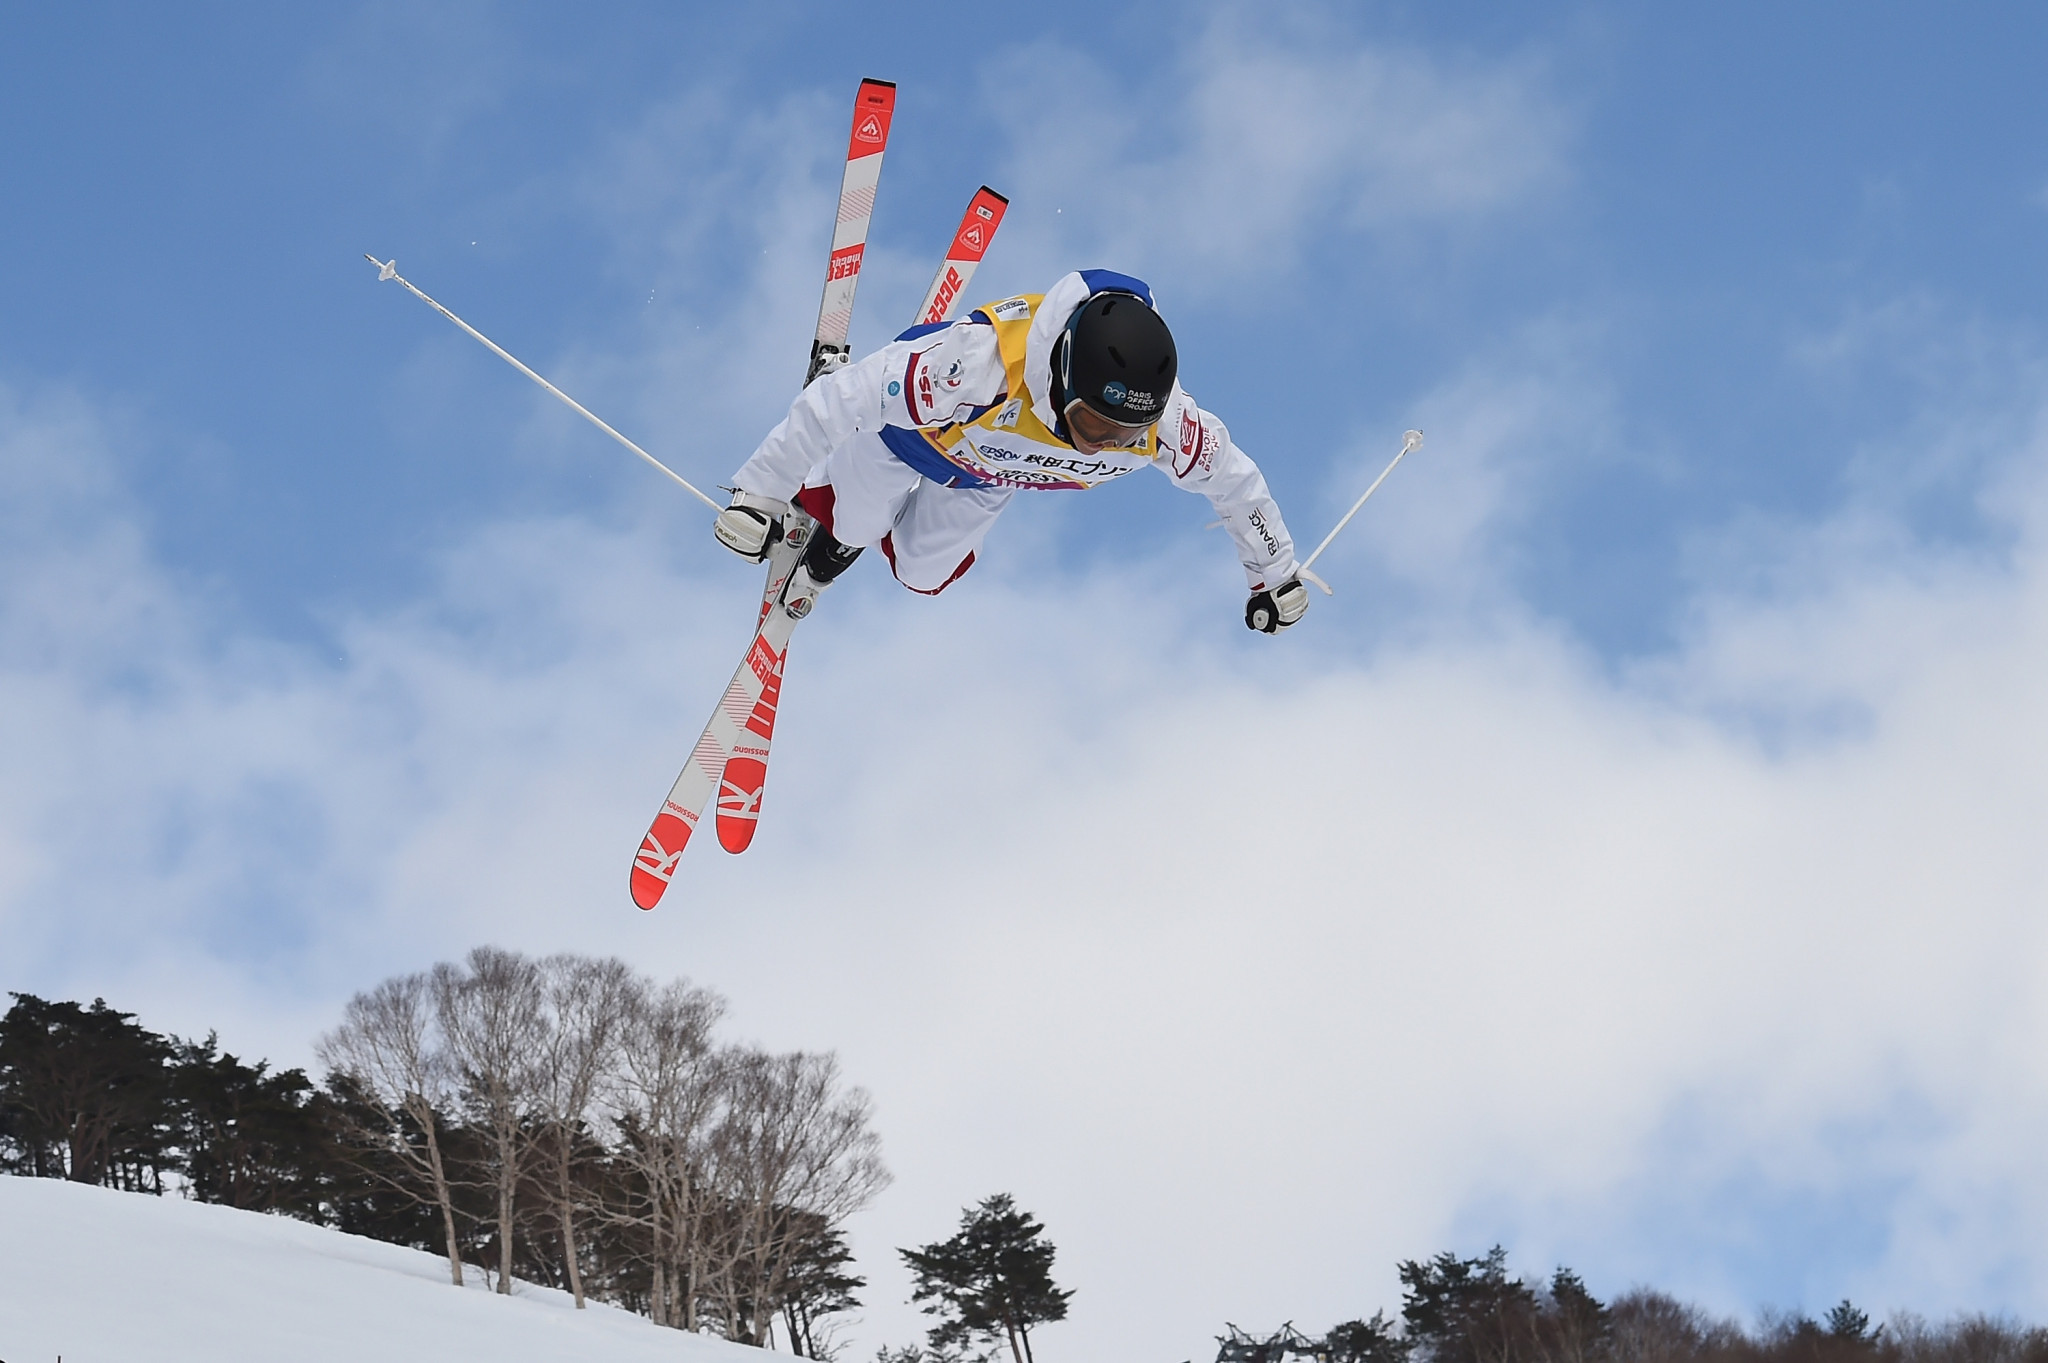 Laffont and Reikherd top qualification at FIS Moguls World Cup in Idre Fjall